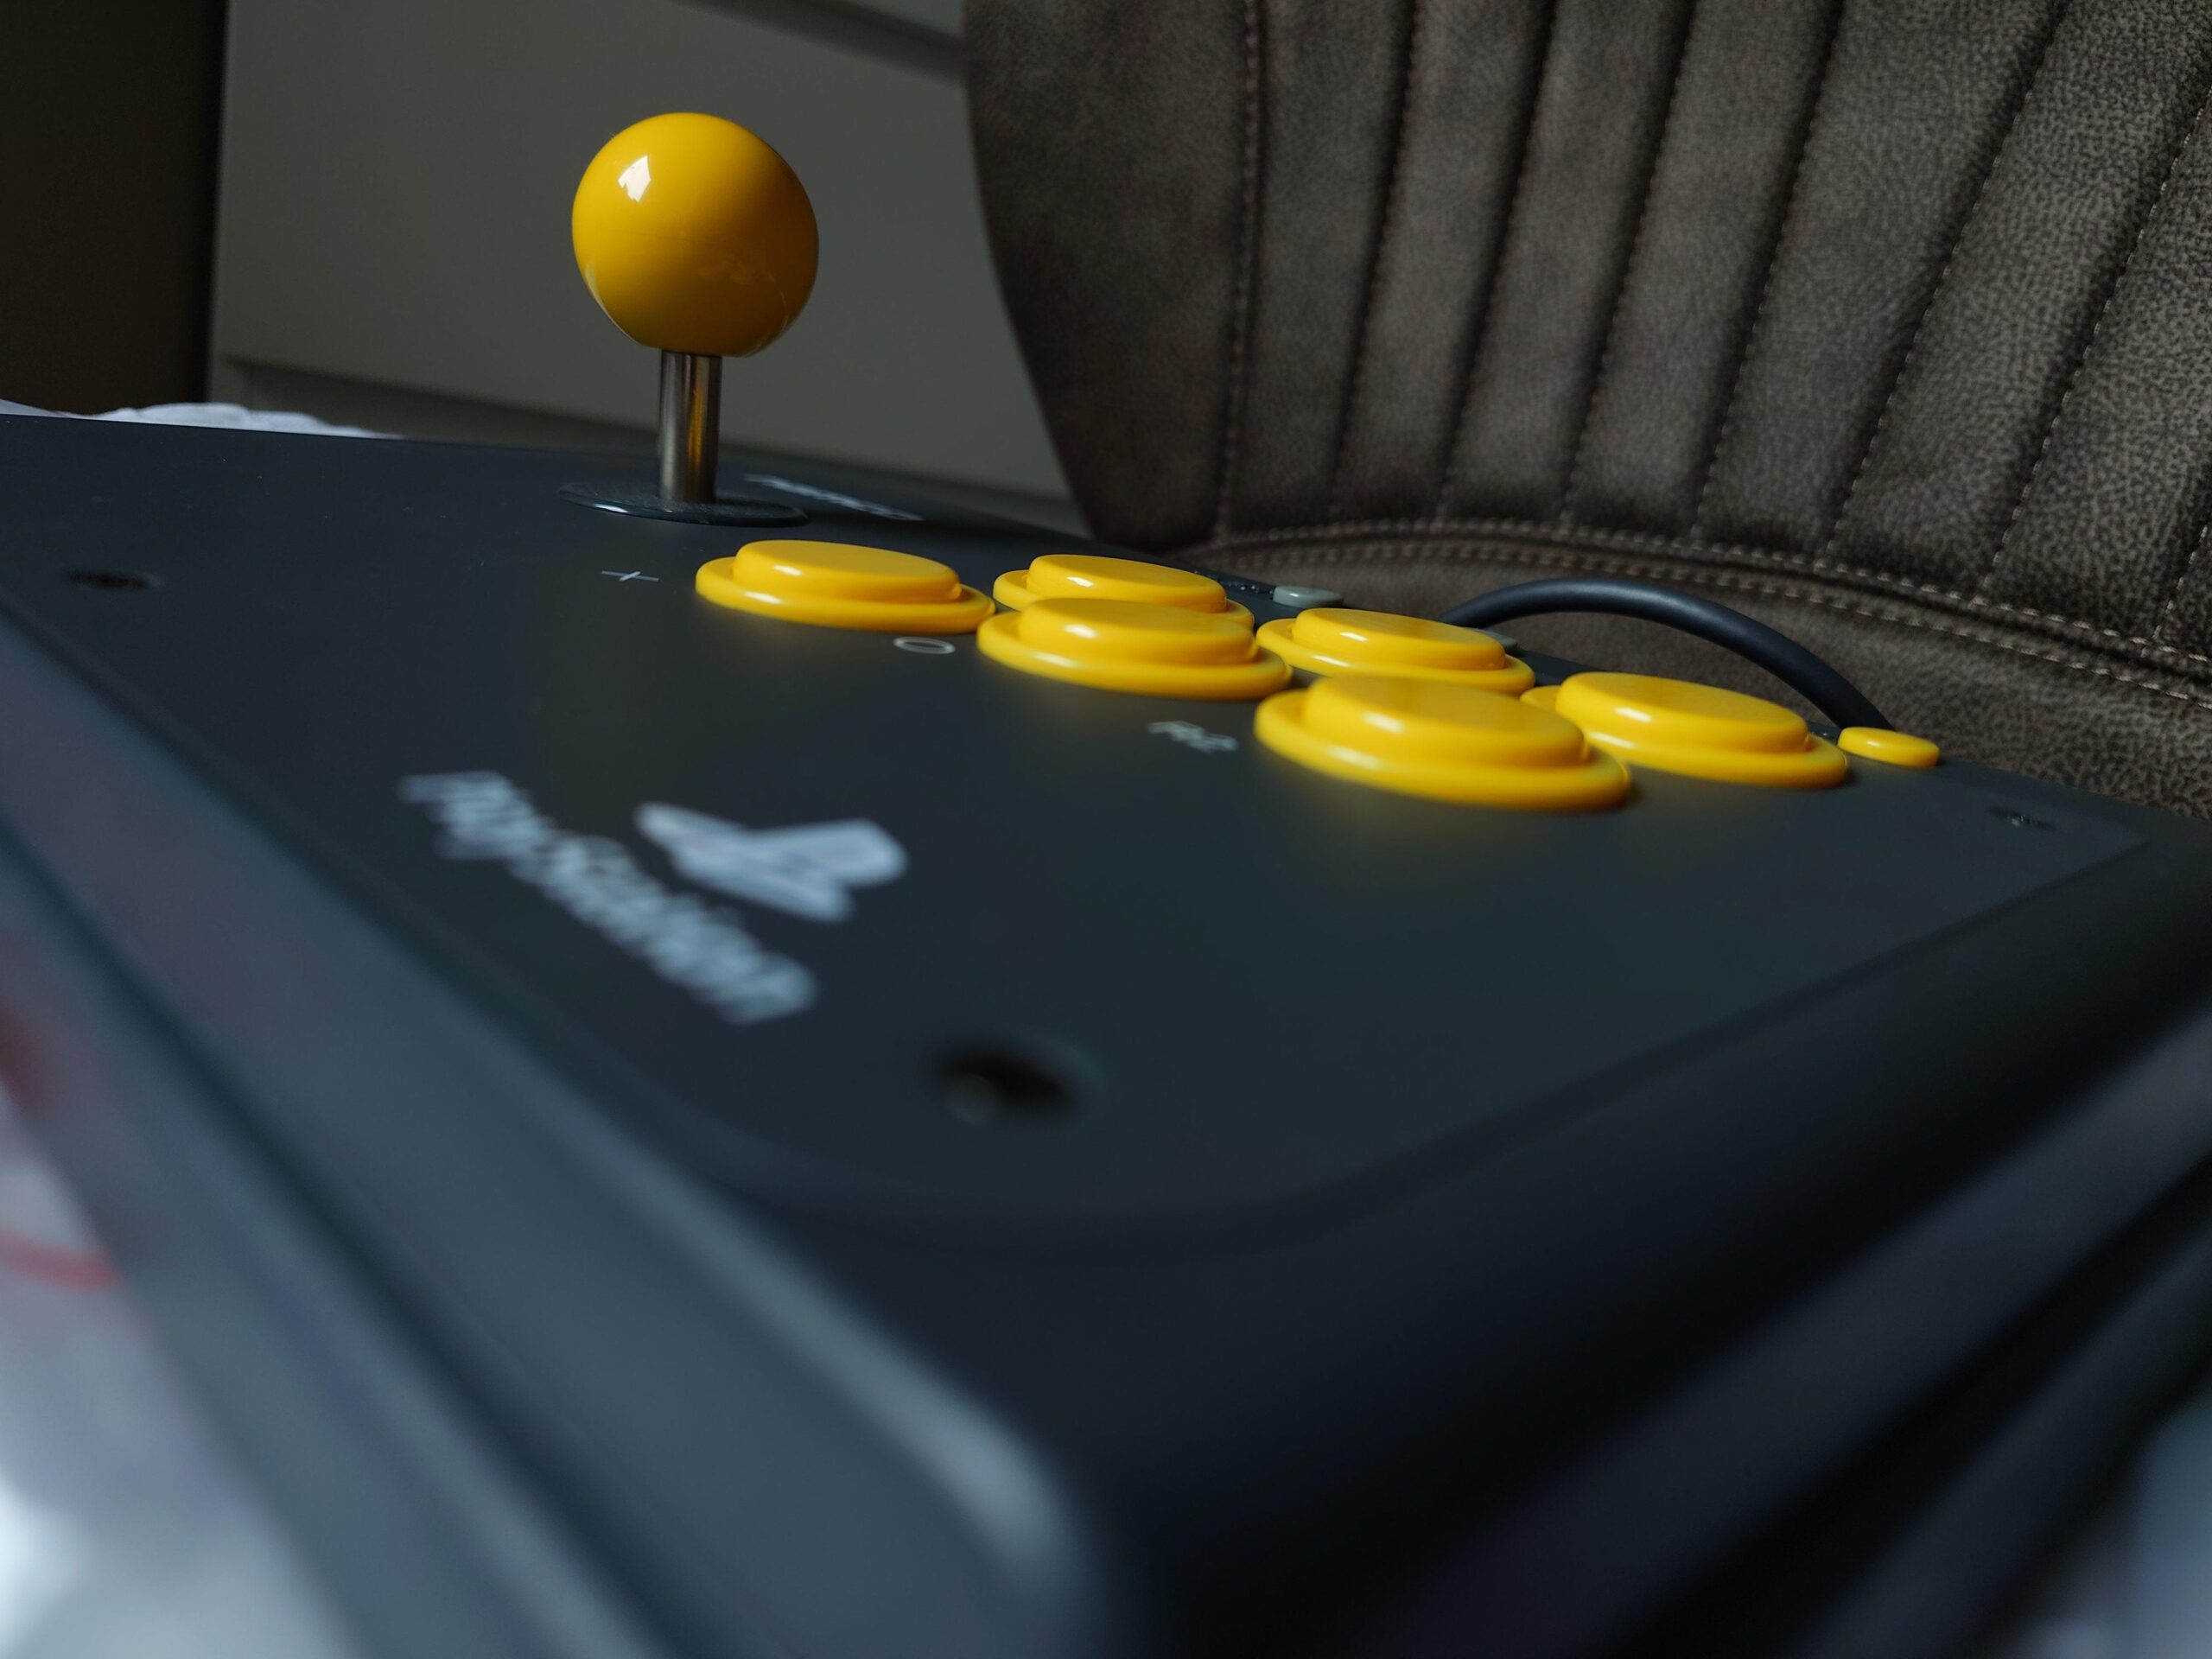 Some photos of my unused 90s PlaystationNamco Arcade Stick